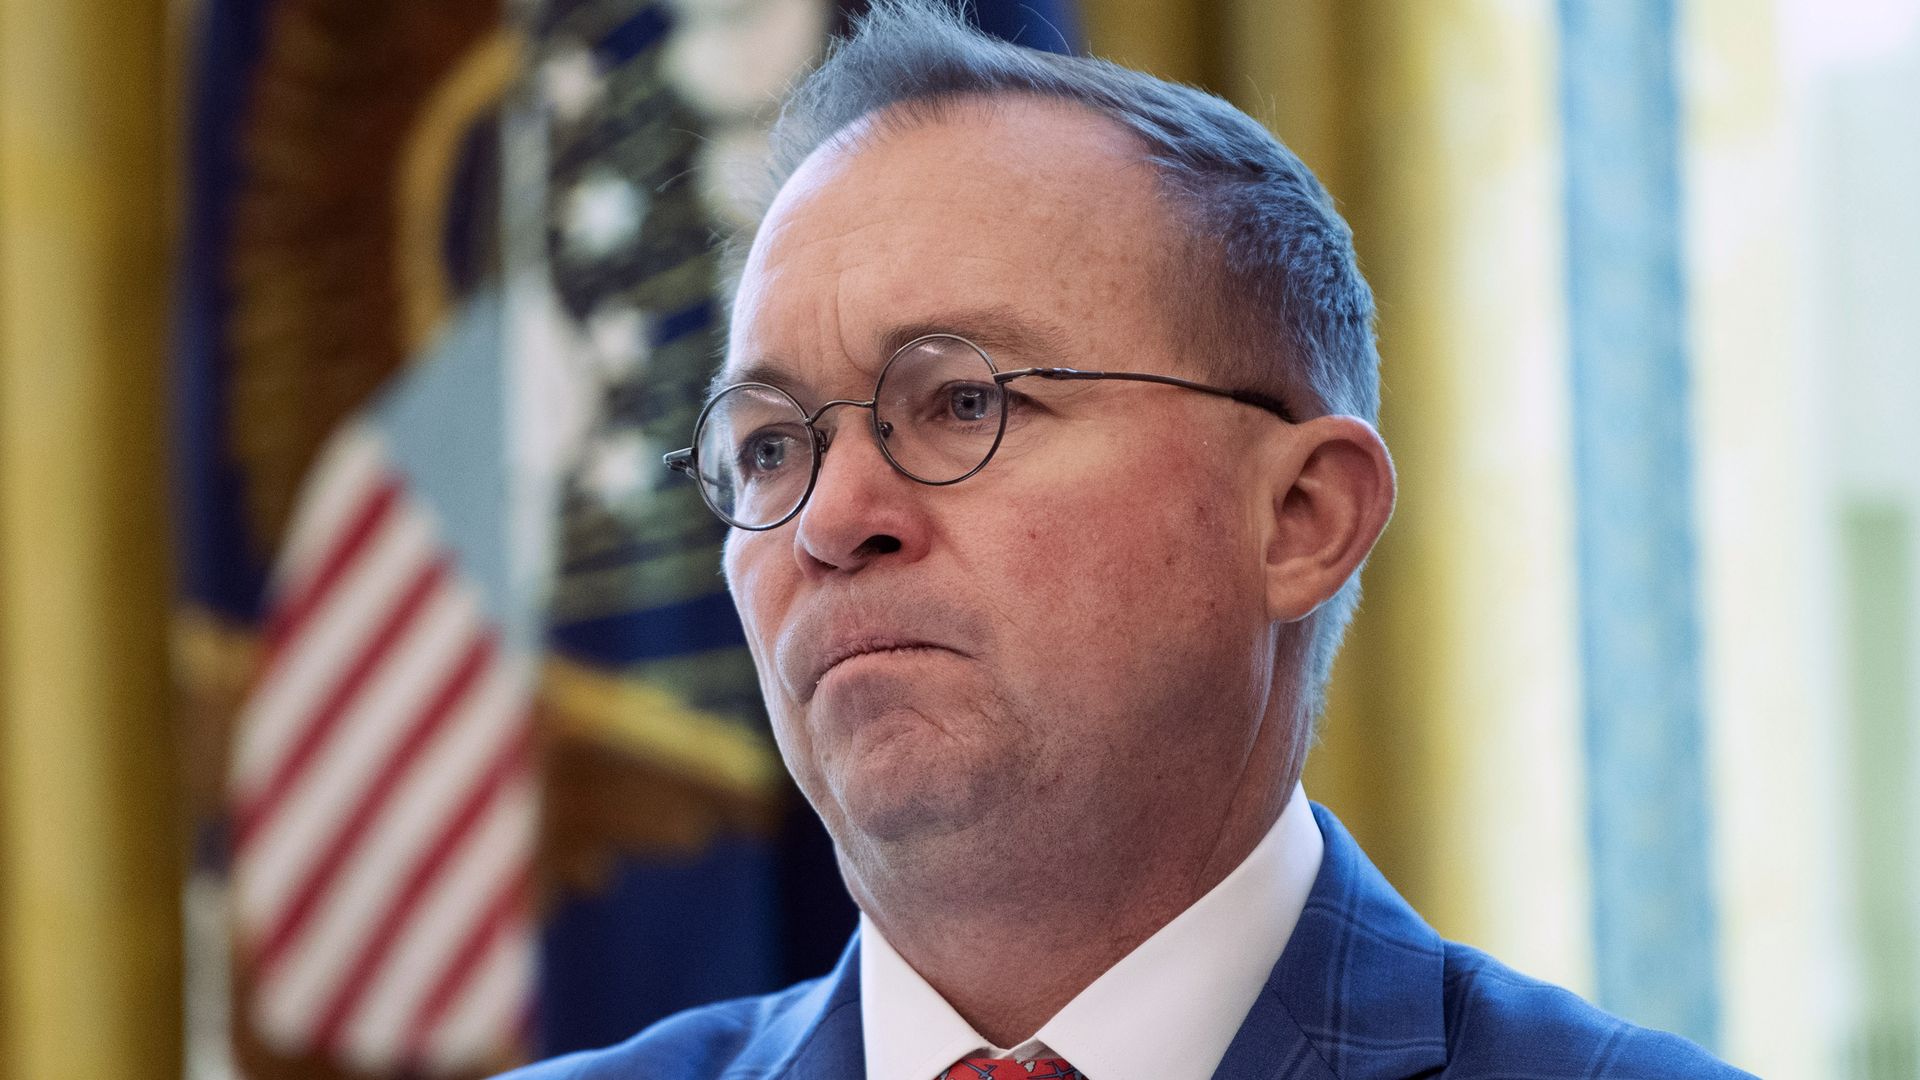 Mick Mulvaney in the White House in March 2020.